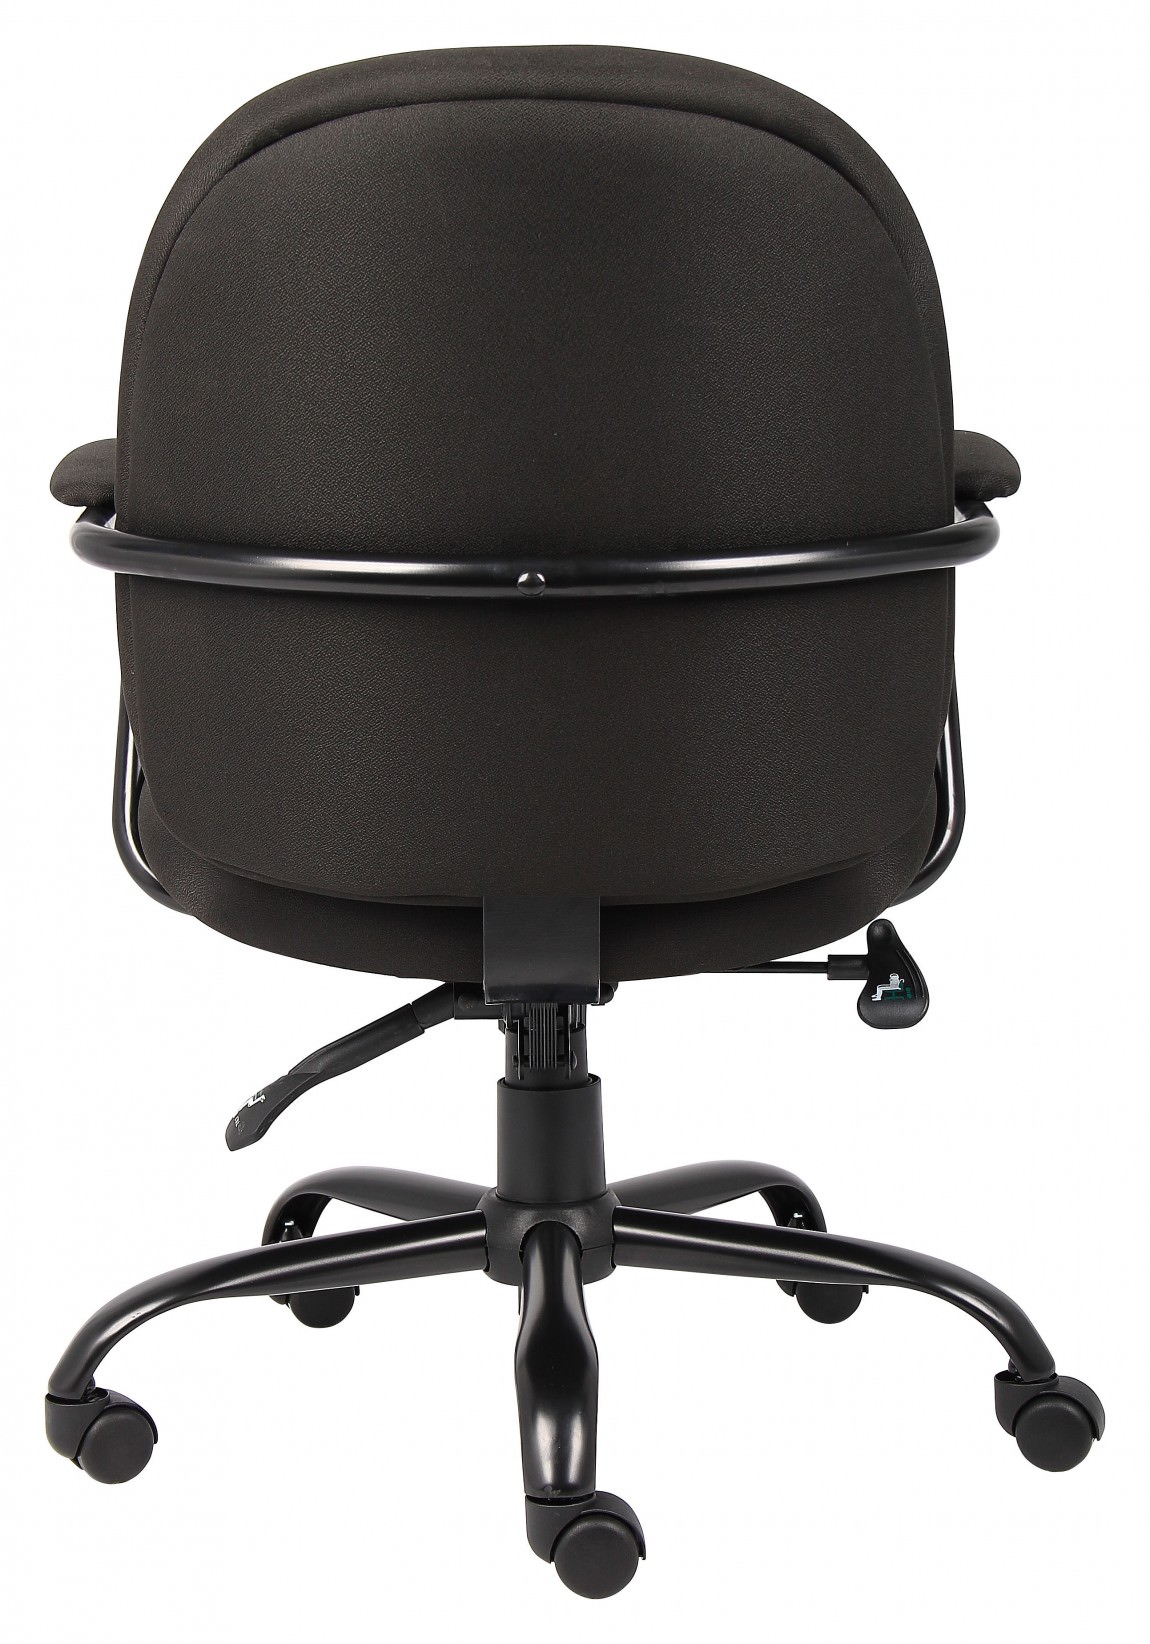 Heavy Duty Task Chair with Arms